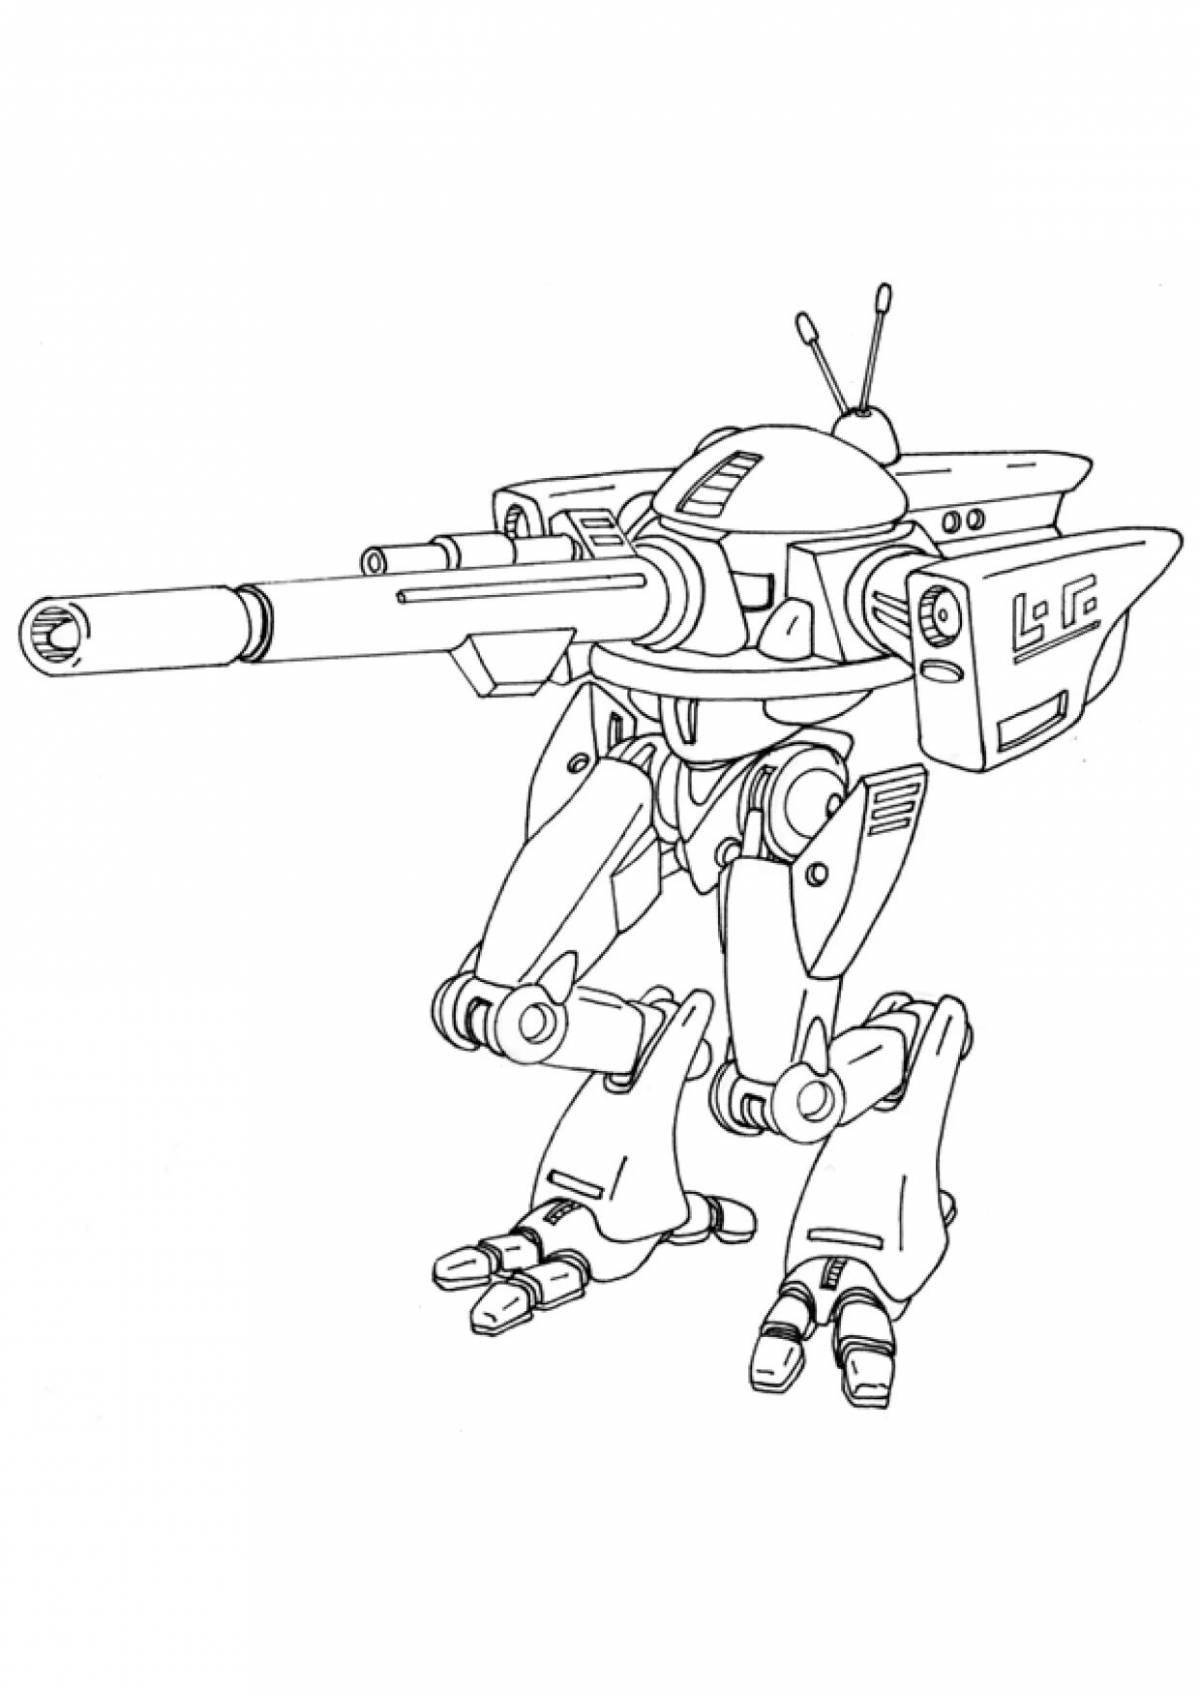 Amazing killer robots coloring page